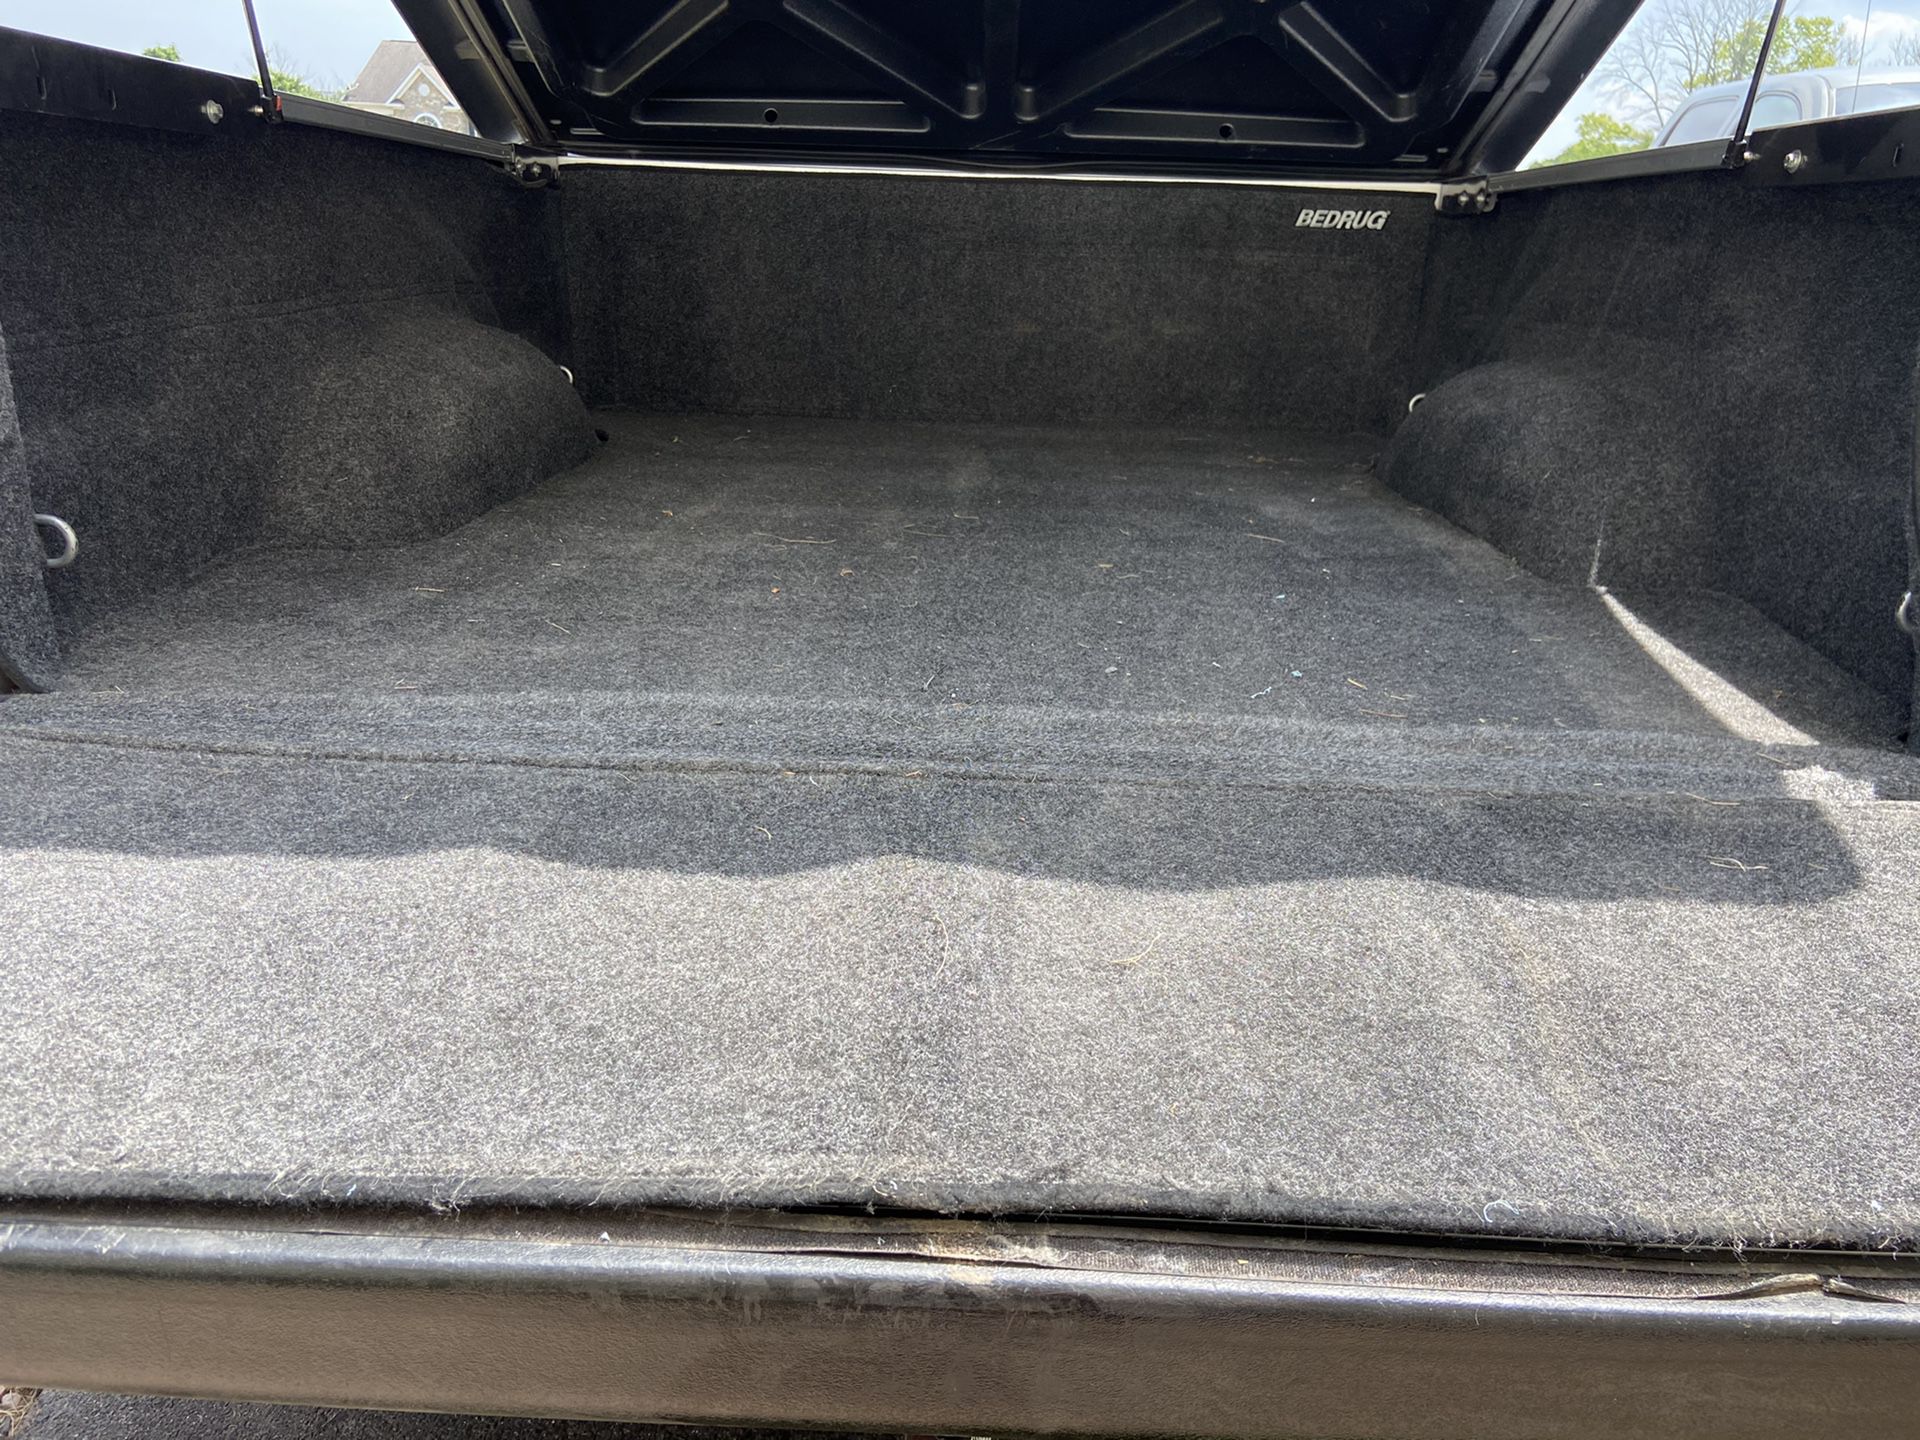 Bed rug ram 1500 6’4” bed need gone ASAP